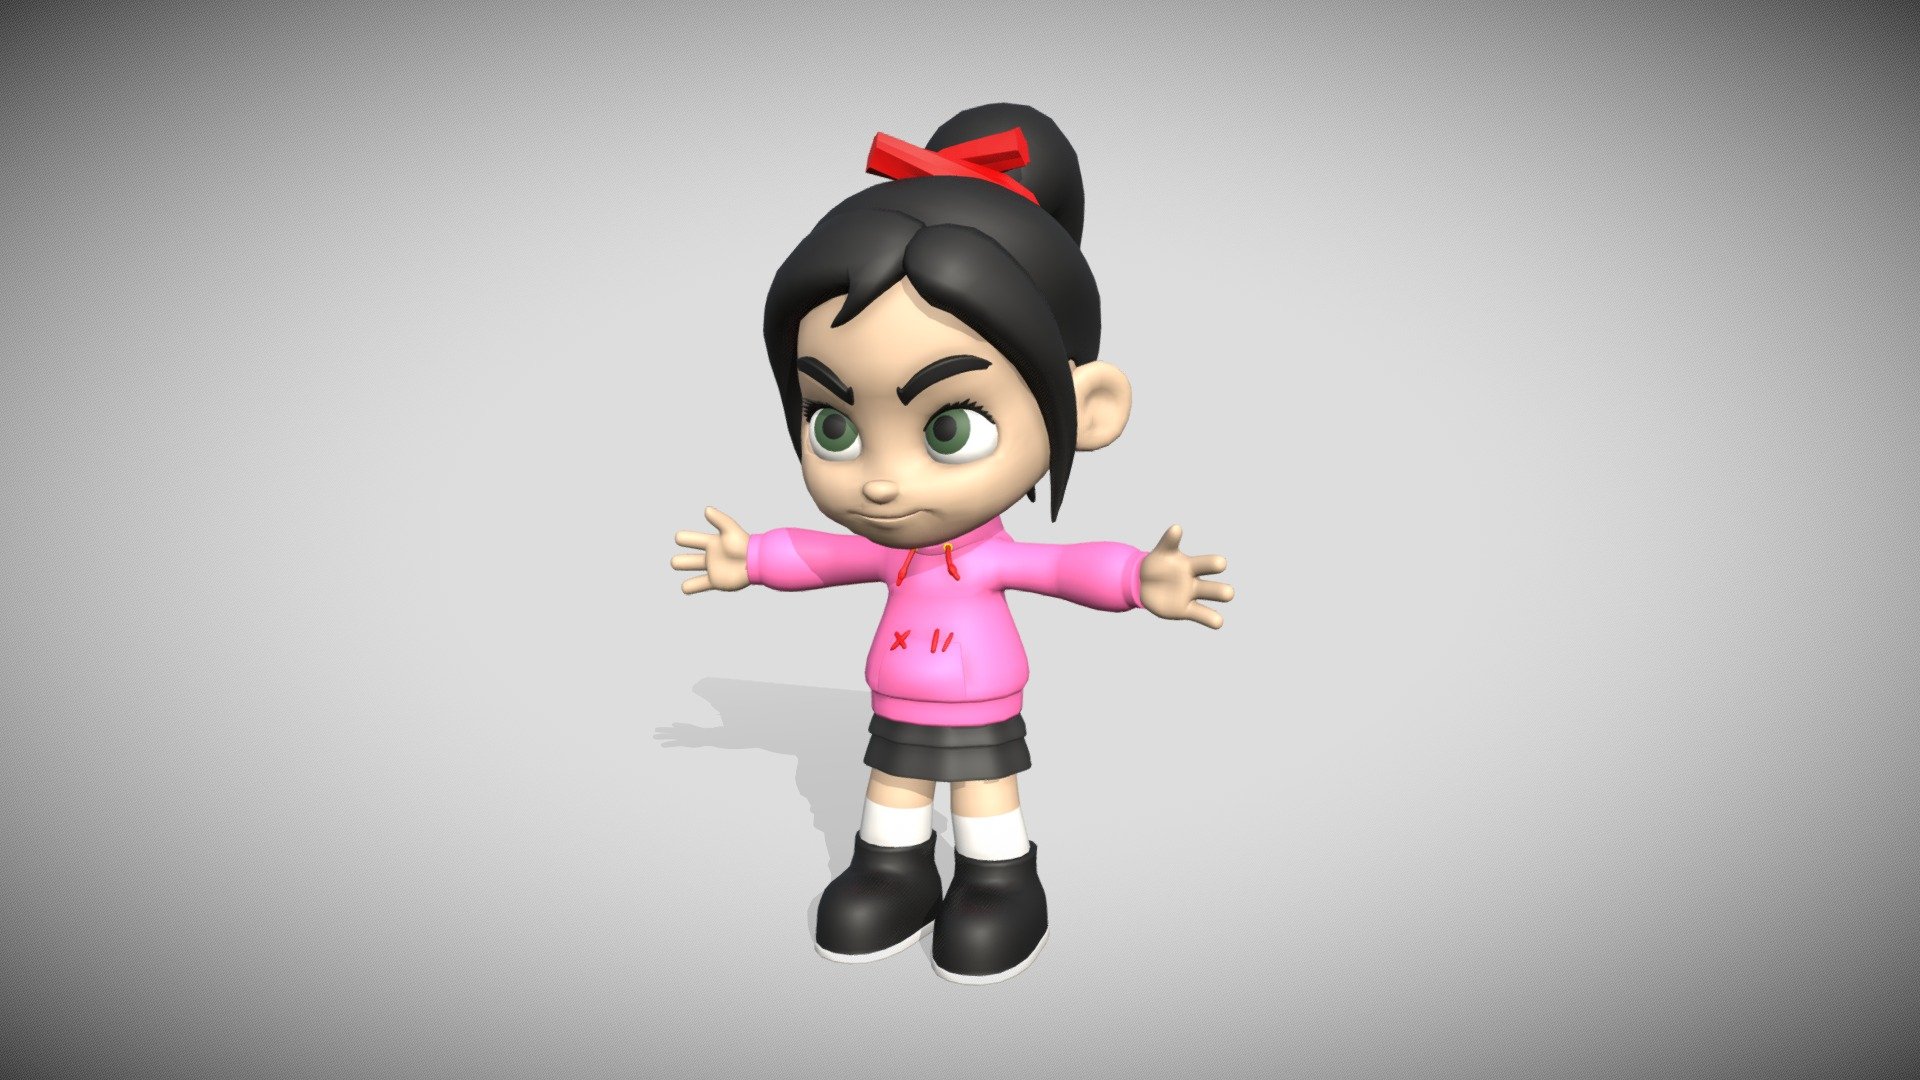 Character made for a videogame project based on Sugar Rush from Wreck-It Ralph - Bittersweet (Vanellope) - 3D model by matarredonadiaz 3d model